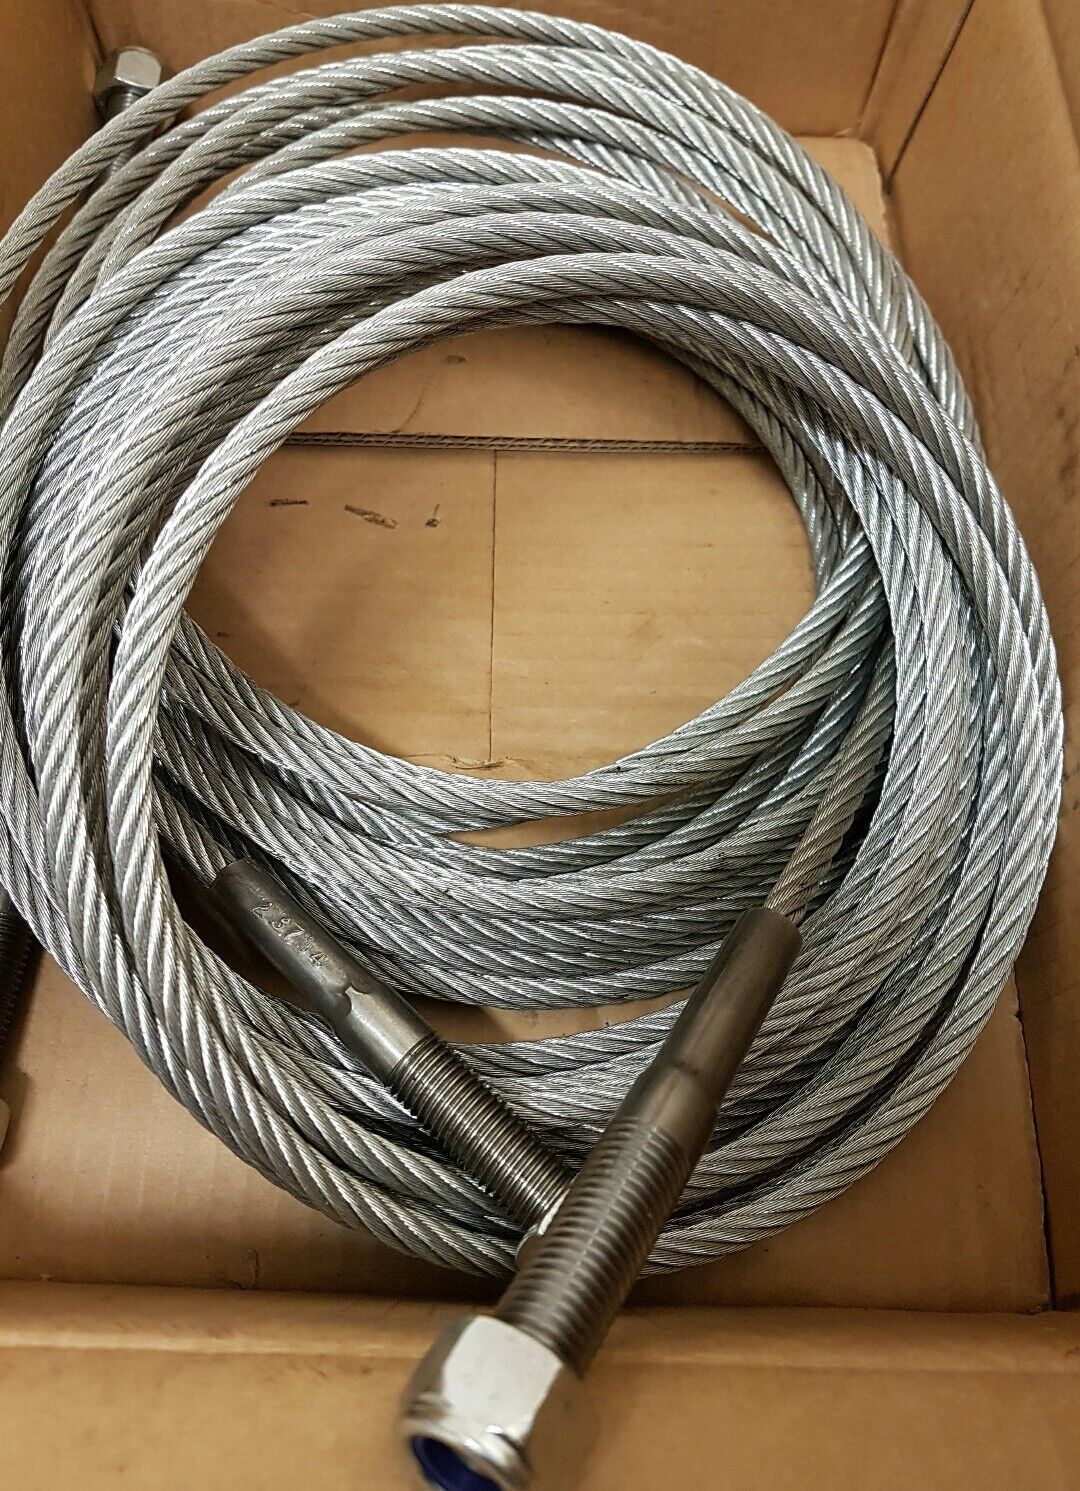 snap on 2 post lift ropes SVL35 cables 8500mm 値引 ランキング第1位 3.5ton